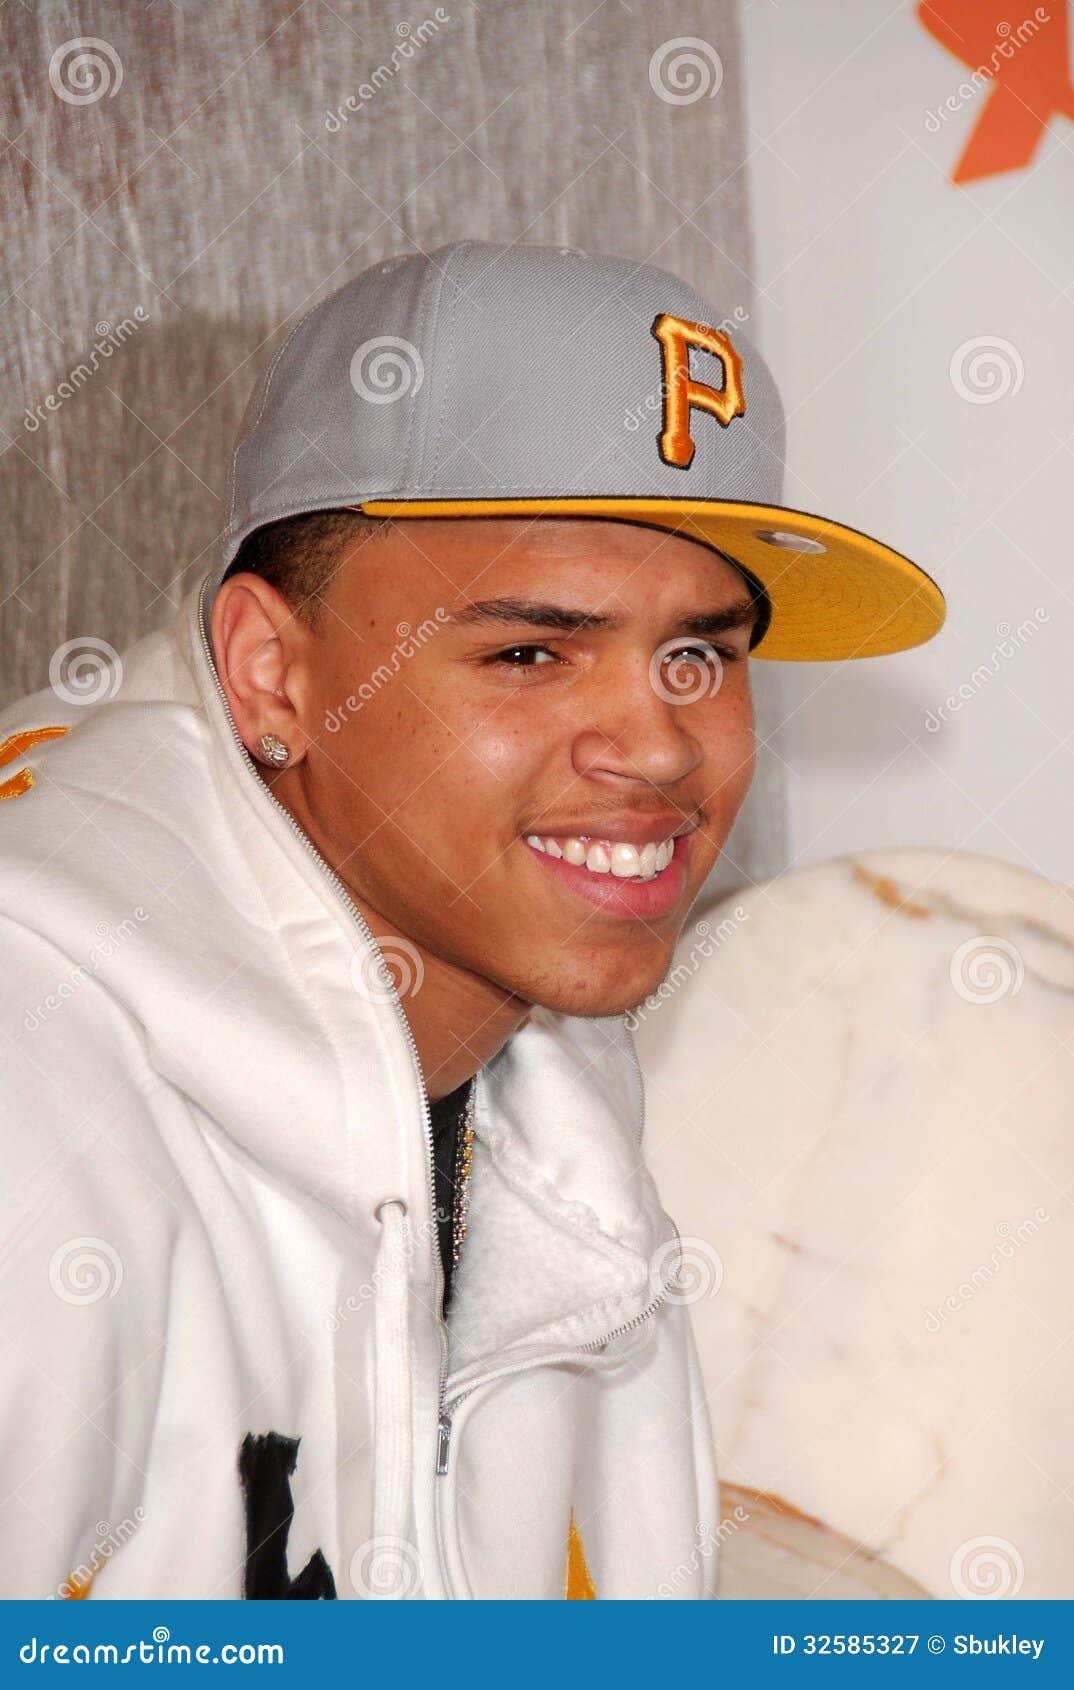 chris brown when he was a kid